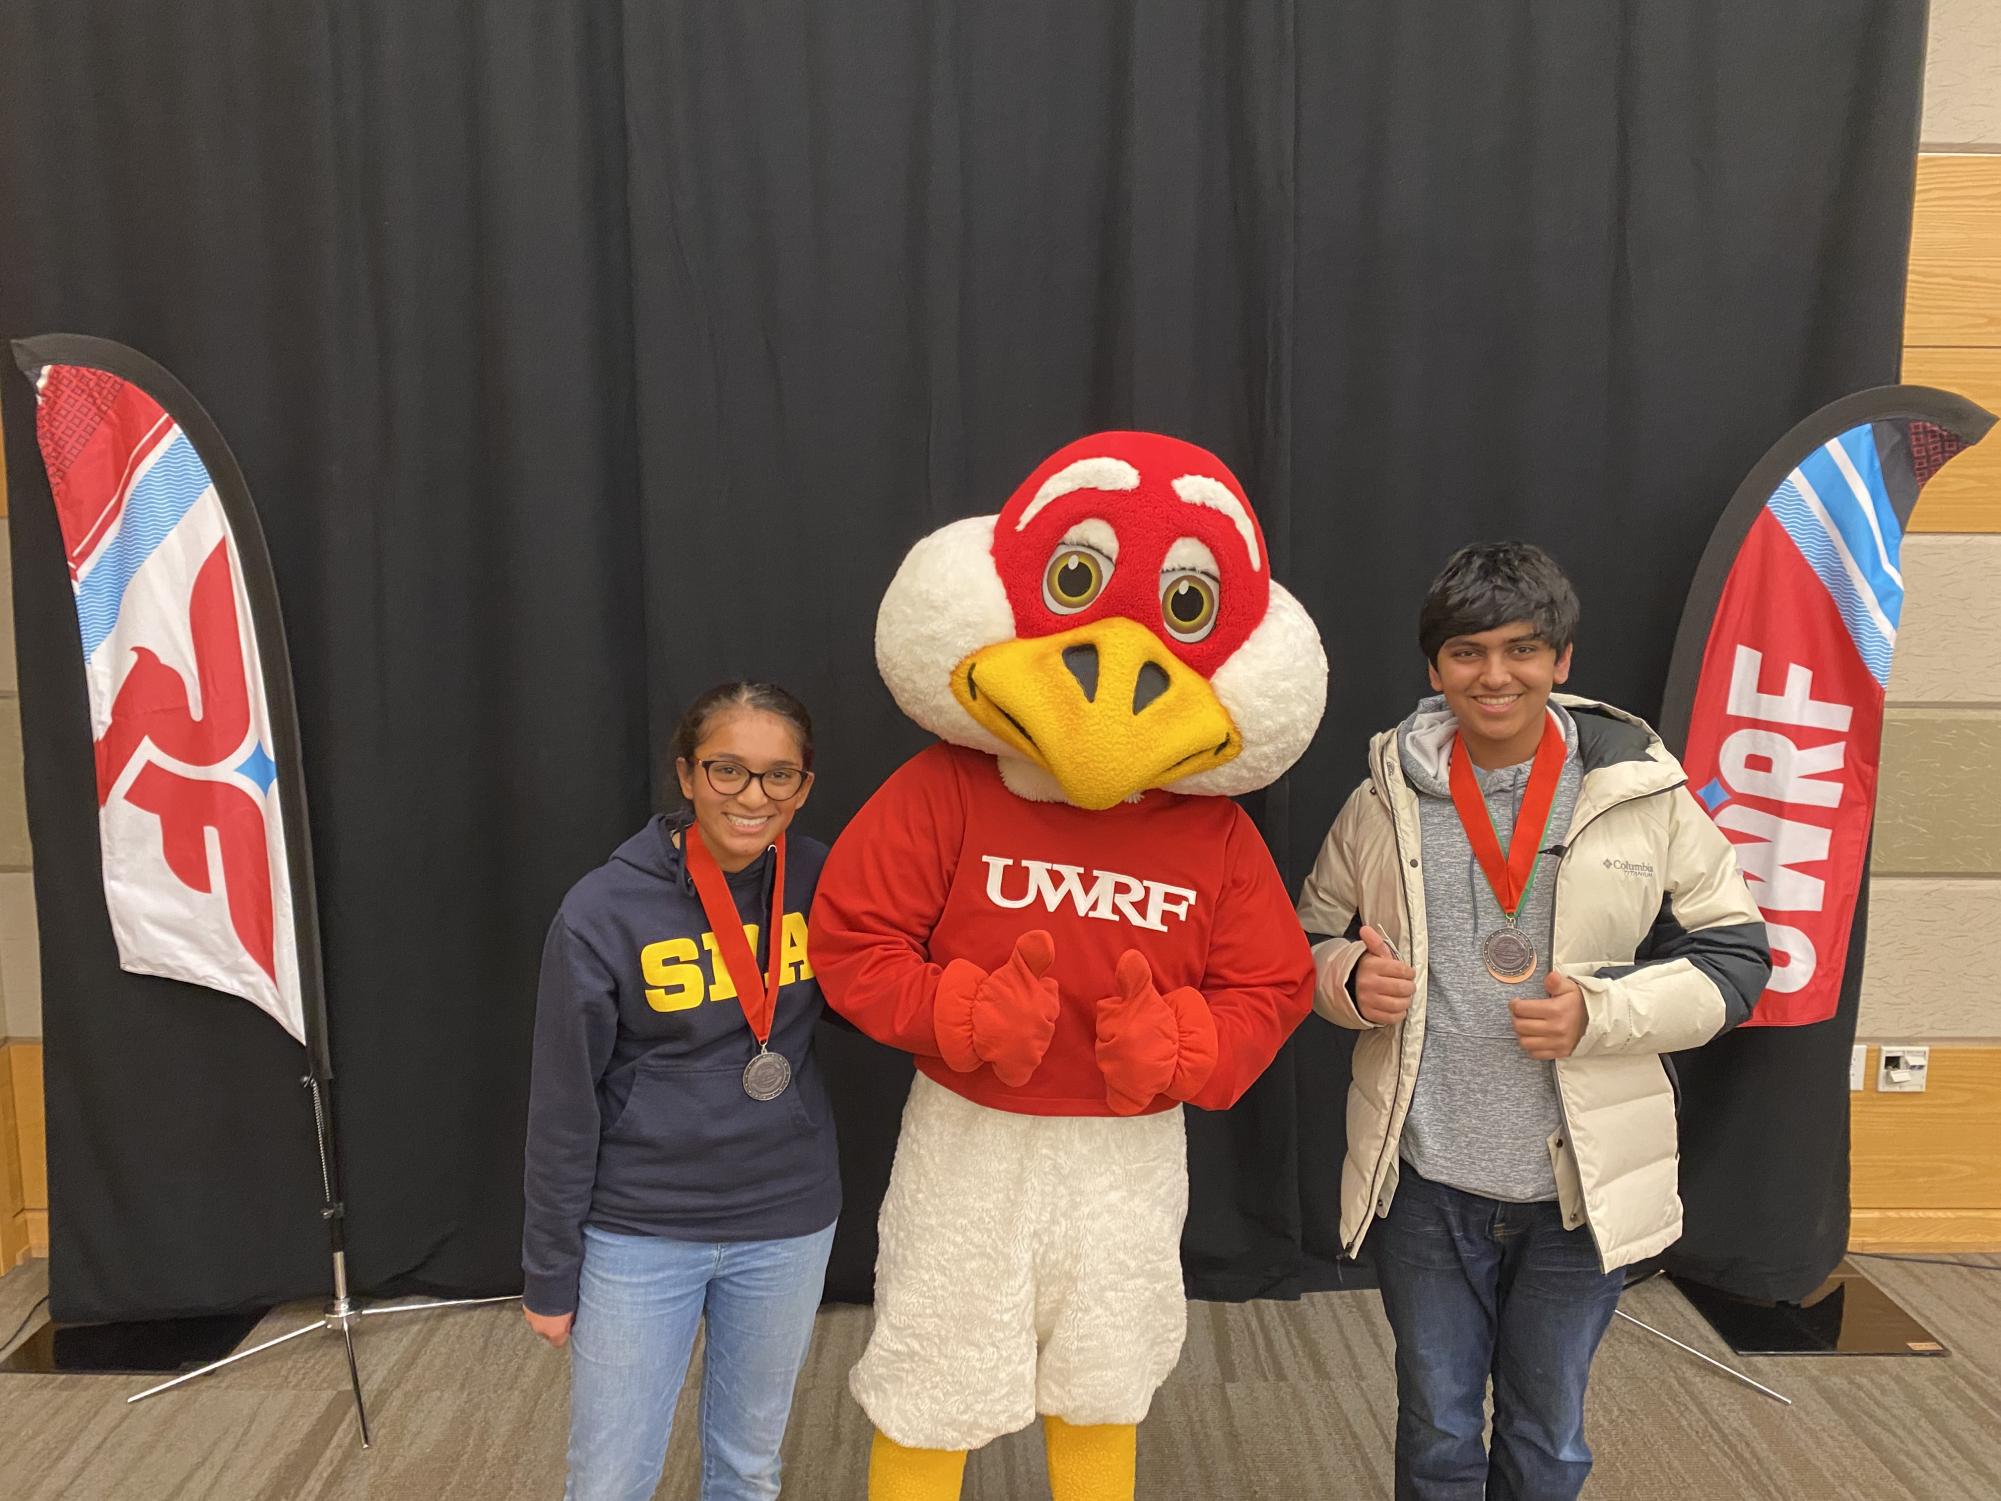 SILVER MEDALISTS. Sophomore Zain Kizilbash and freshman Nabeeha Qadri pose with the University of Wisconsin River Falls mascot after placing second in the Fossils event. (Submitted Photo: Nabeeha Qadri)